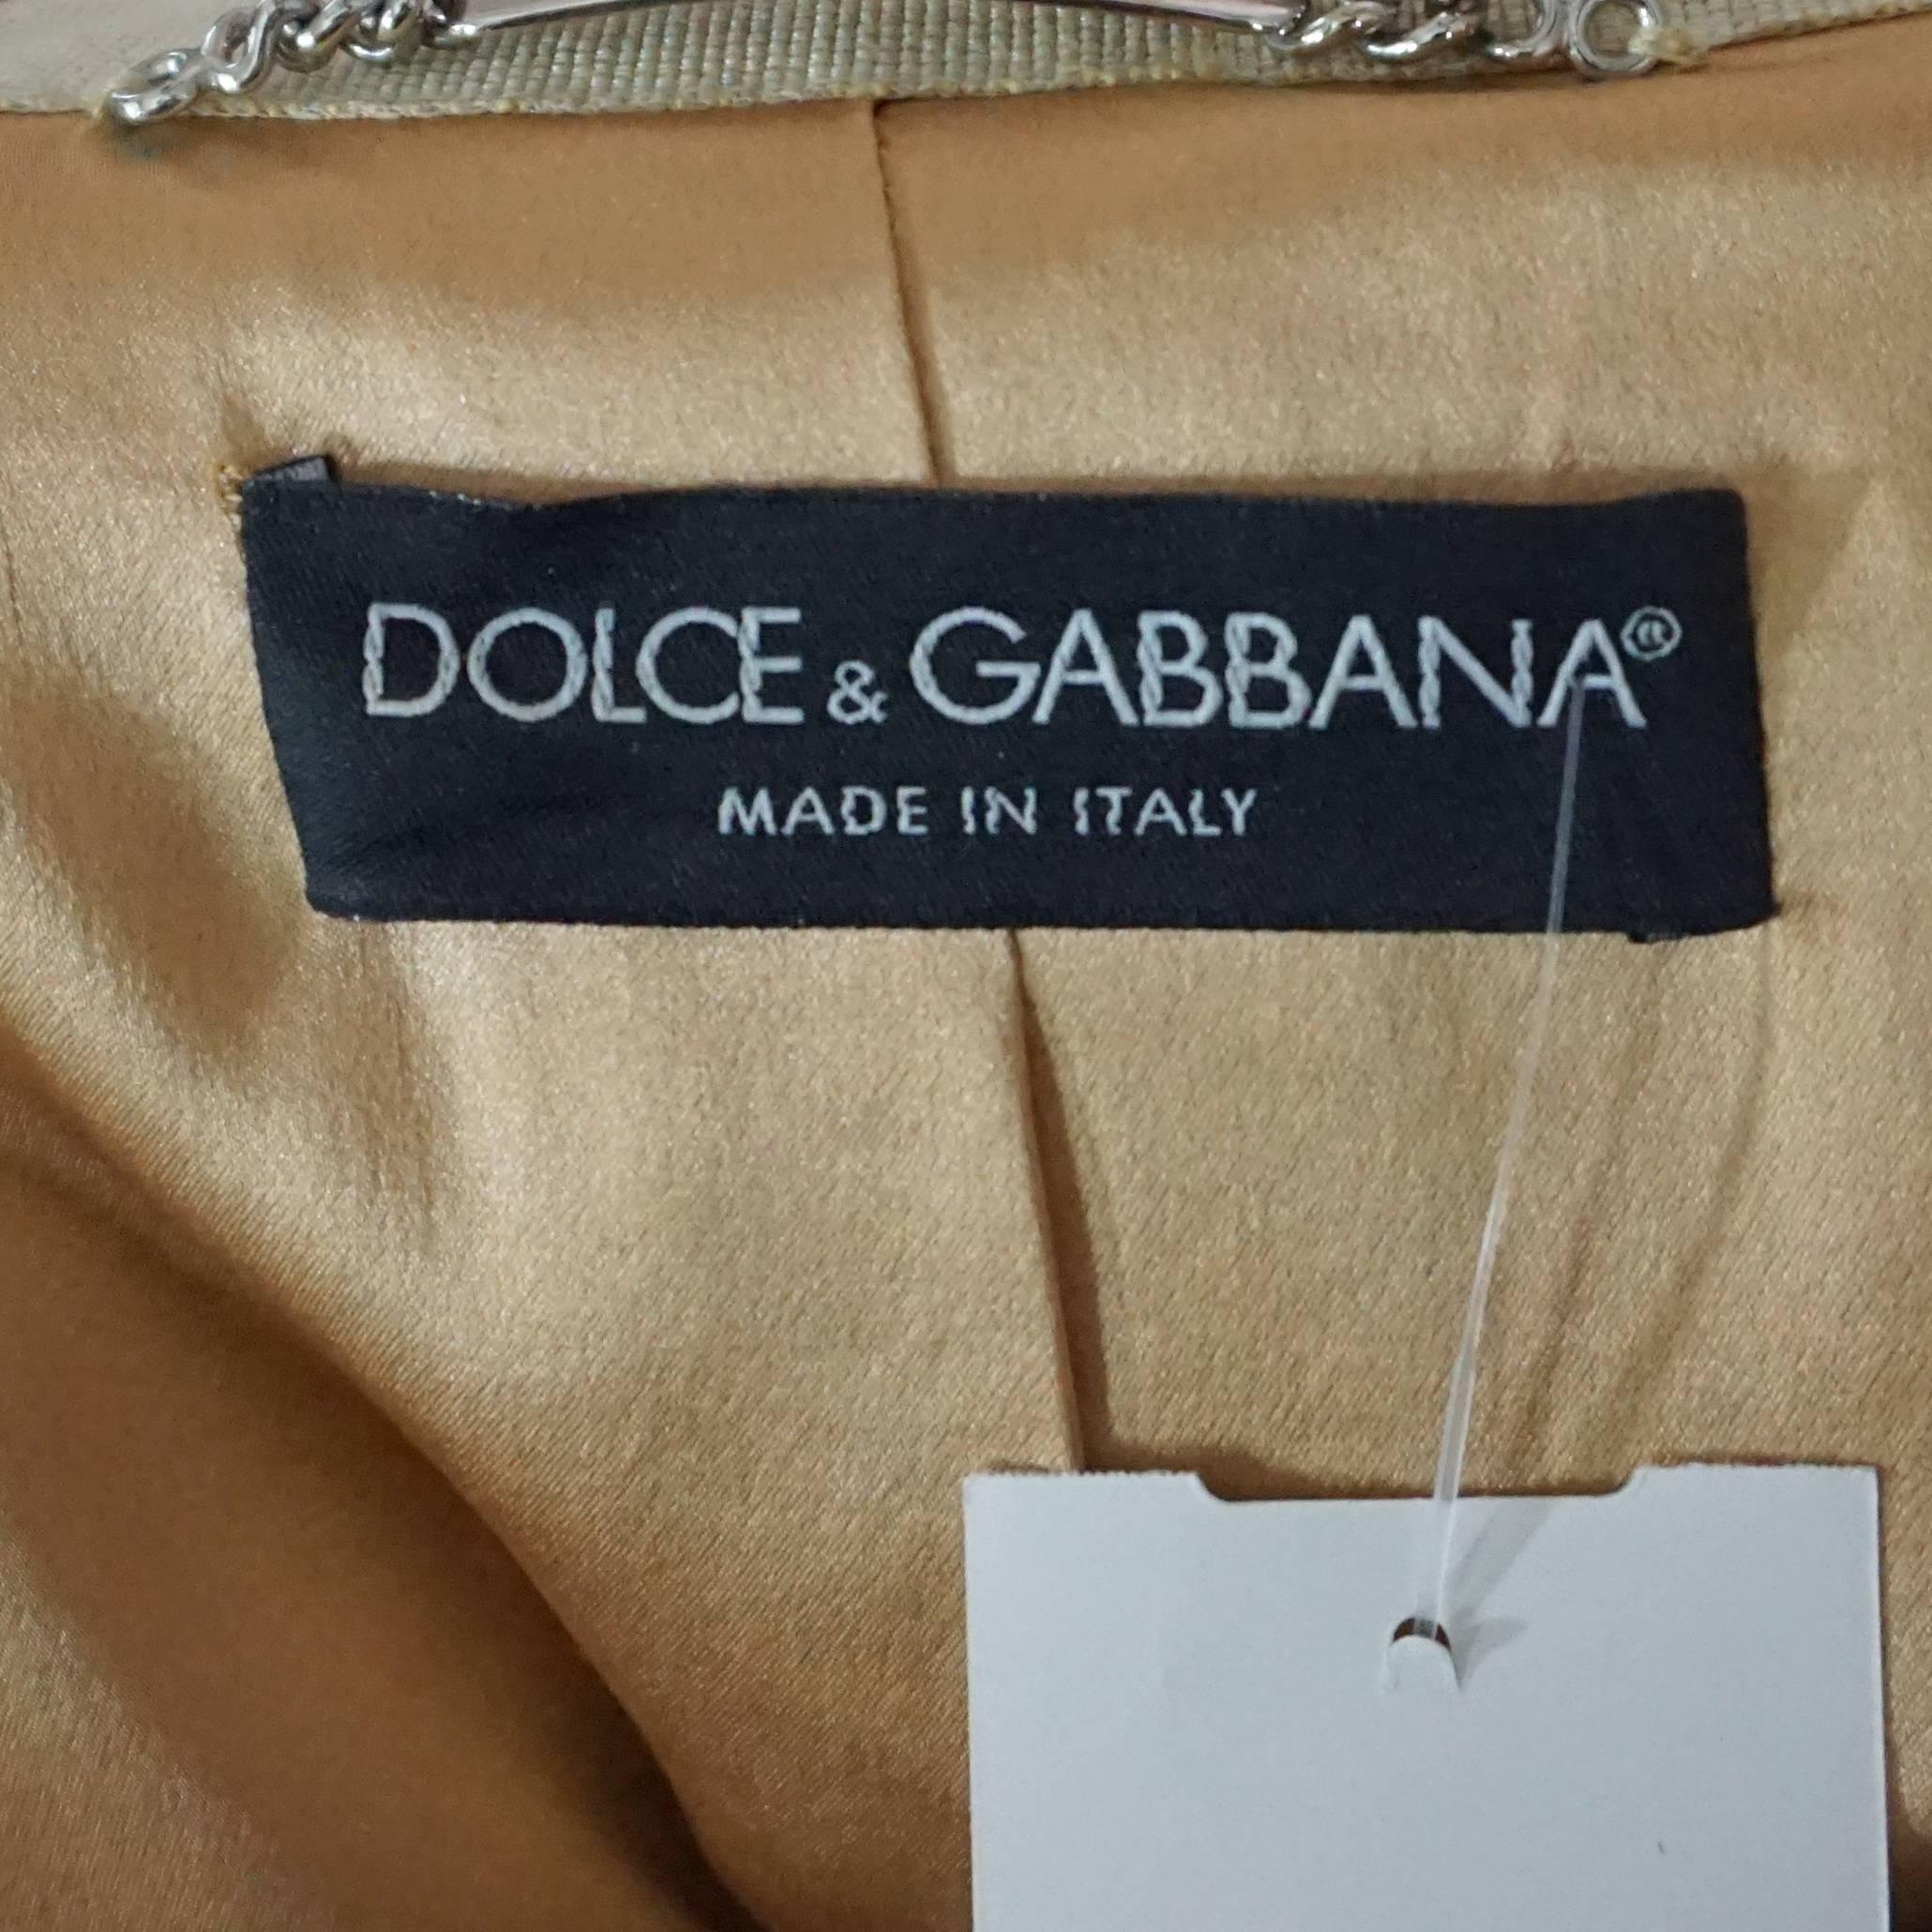 Dolce & Gabanna Silk Gold Brocade Jacket with mother of pearl trim - 44 In Good Condition For Sale In West Palm Beach, FL